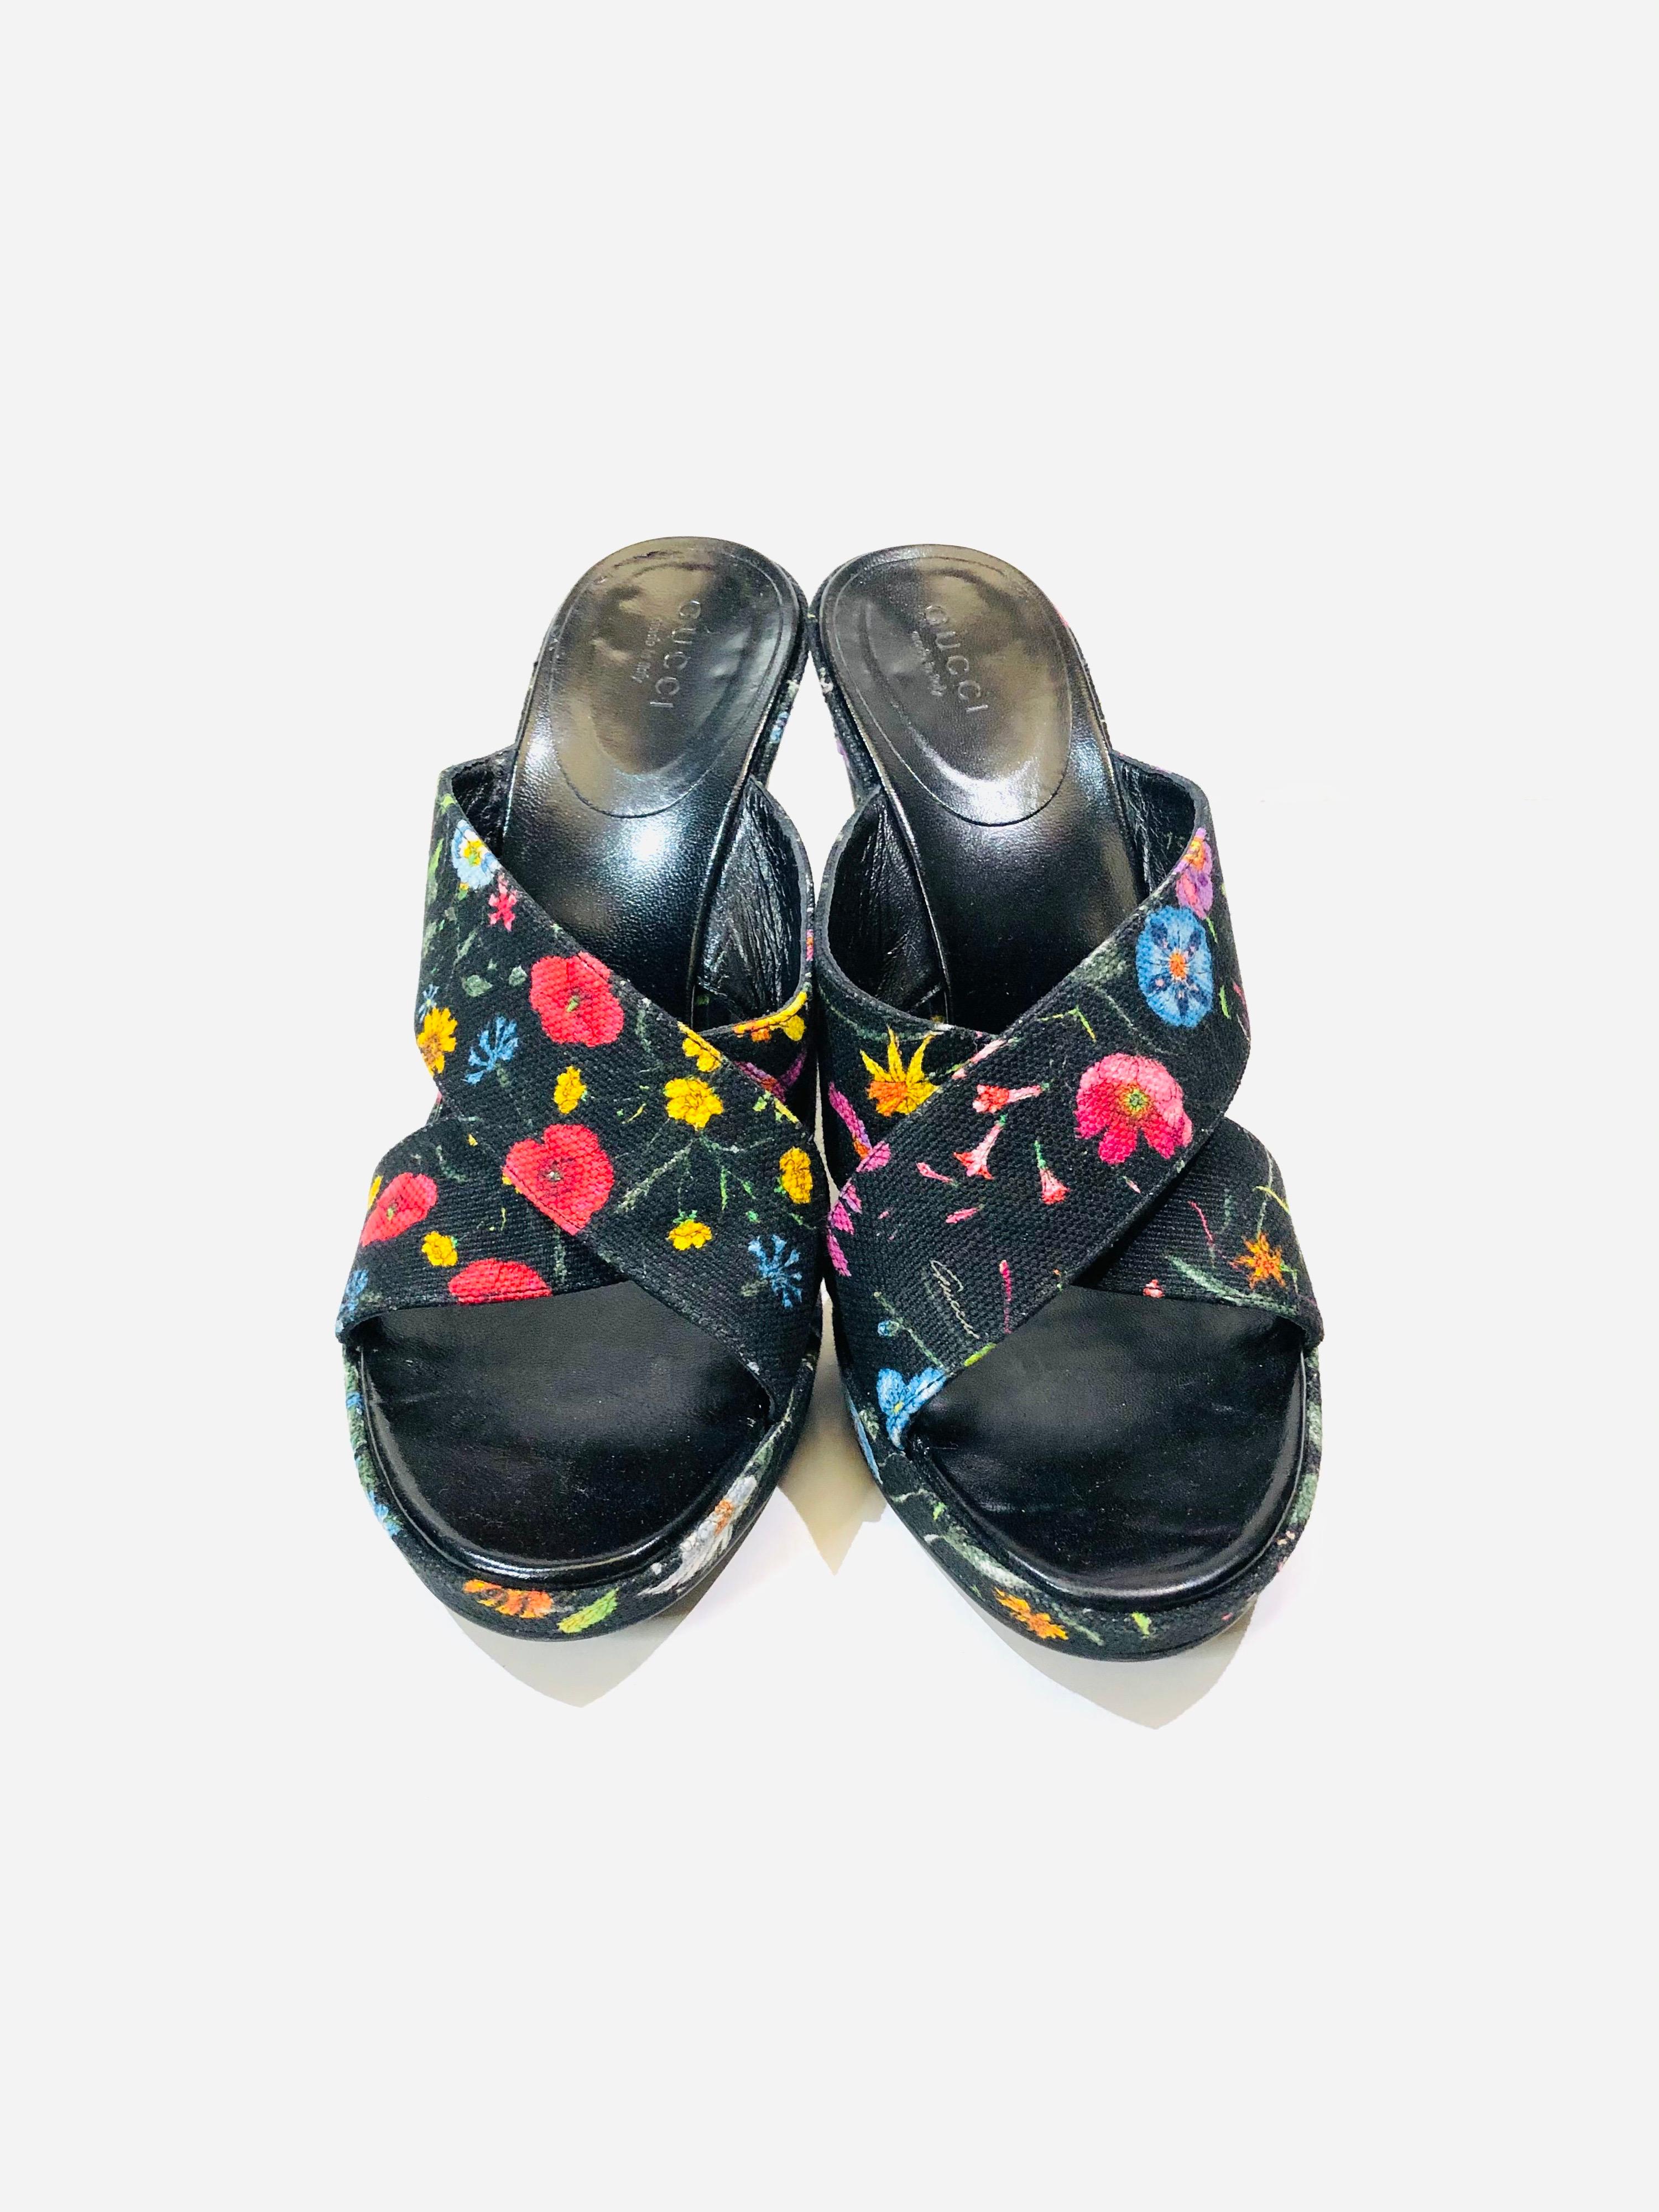 - These beautiful Gucci floral canvas sandals mules is one of a kind! Let yourself surrounded by a garden day and night! 

- Size 38. 

